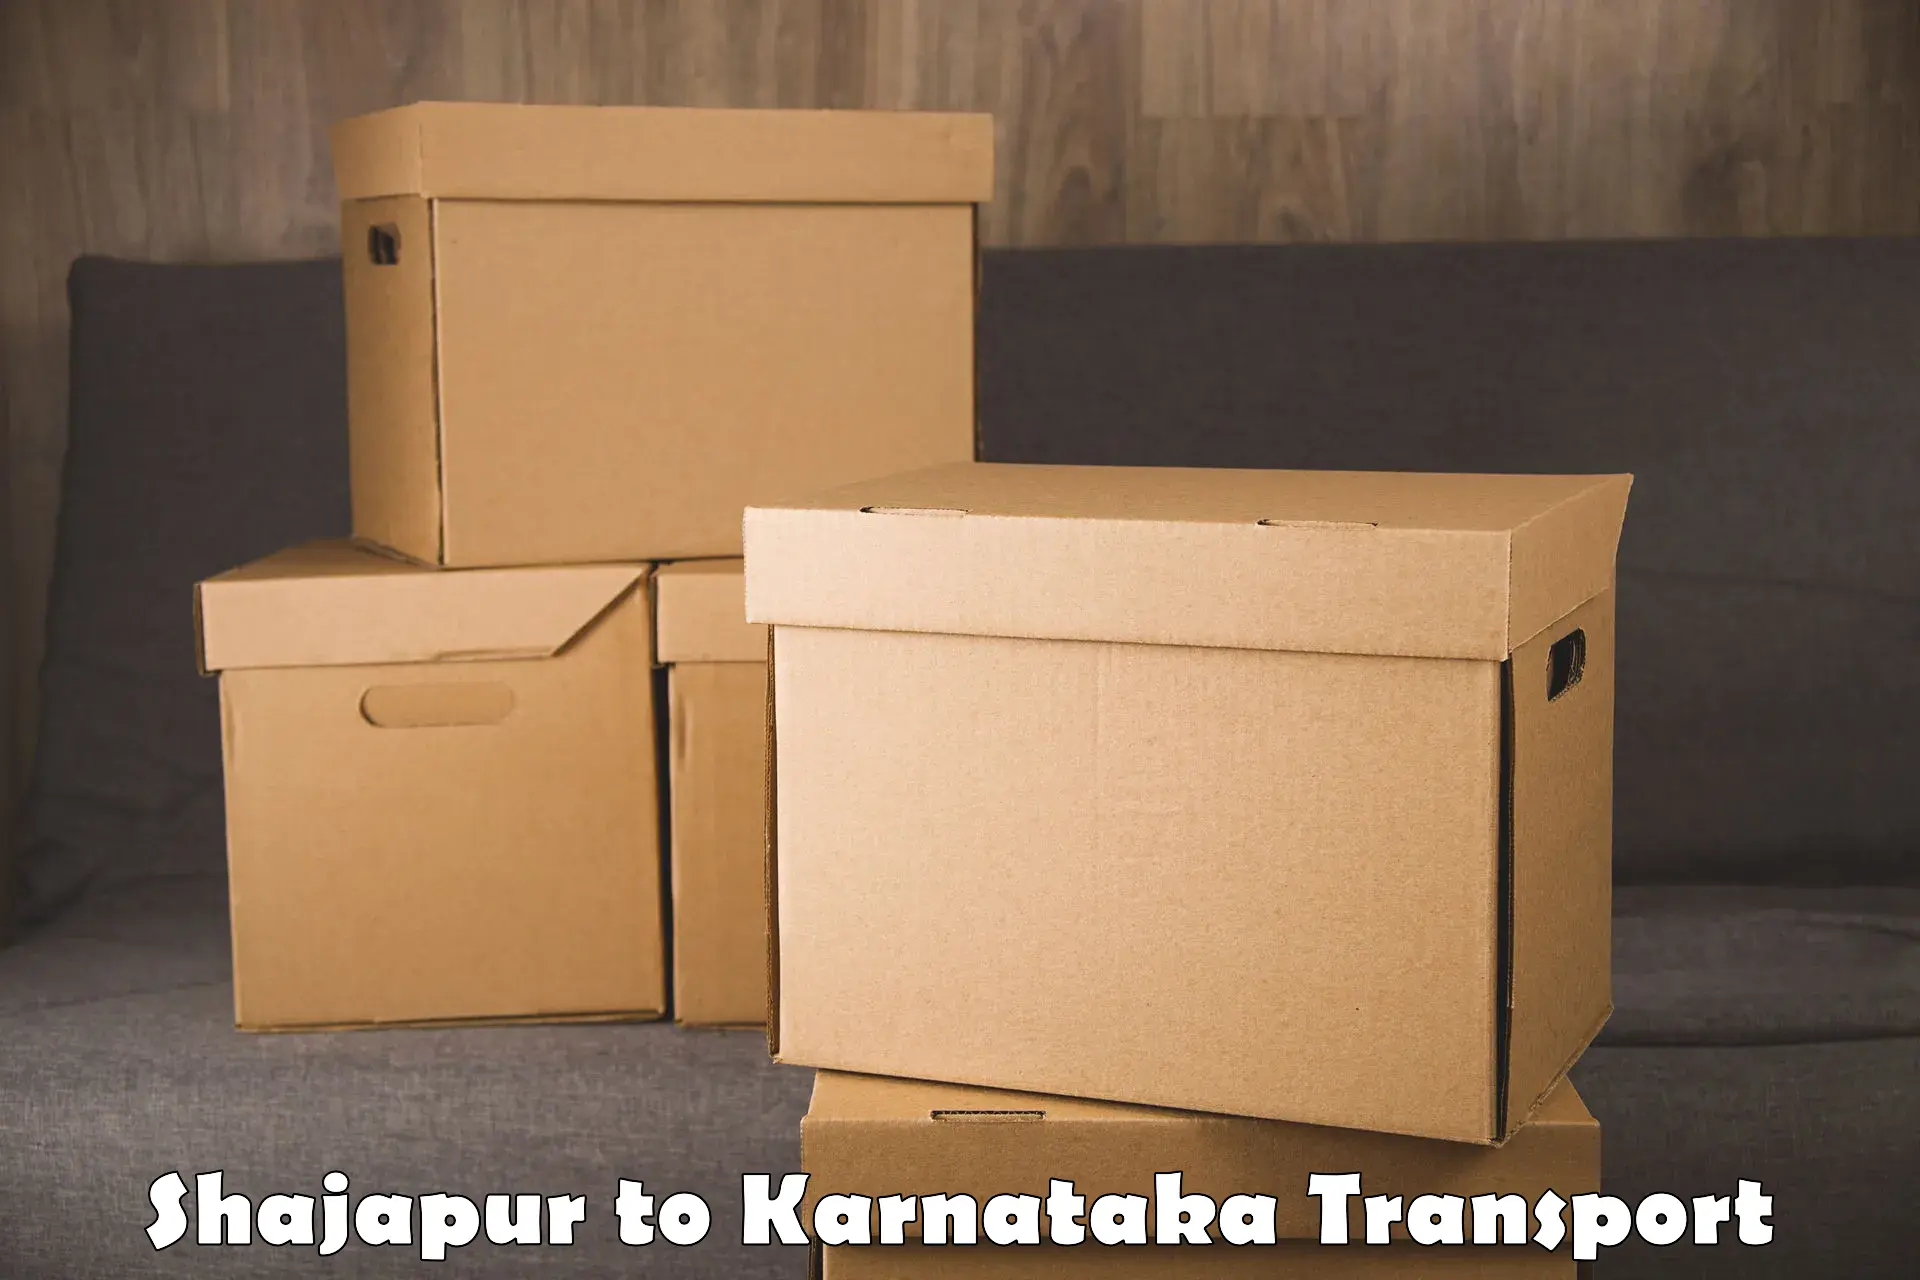 Commercial transport service Shajapur to Yellare